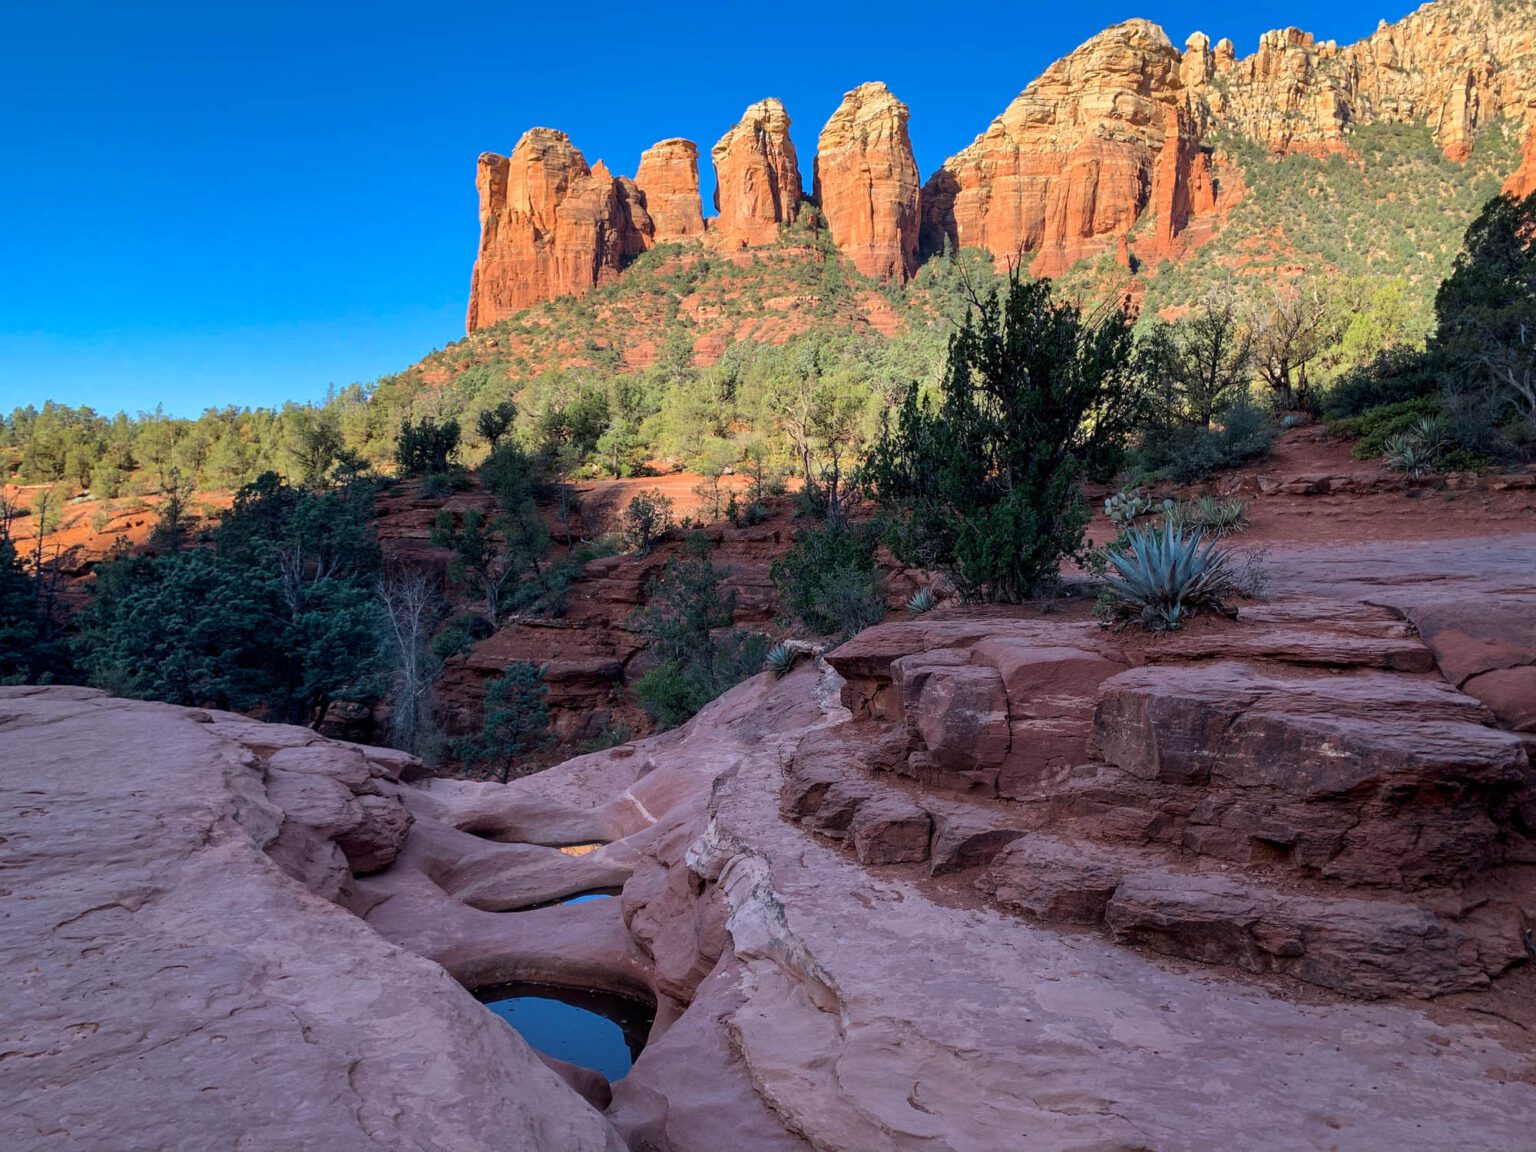 The 9 Best Hikes In Sedona, AZ A Complete Hiking Guide